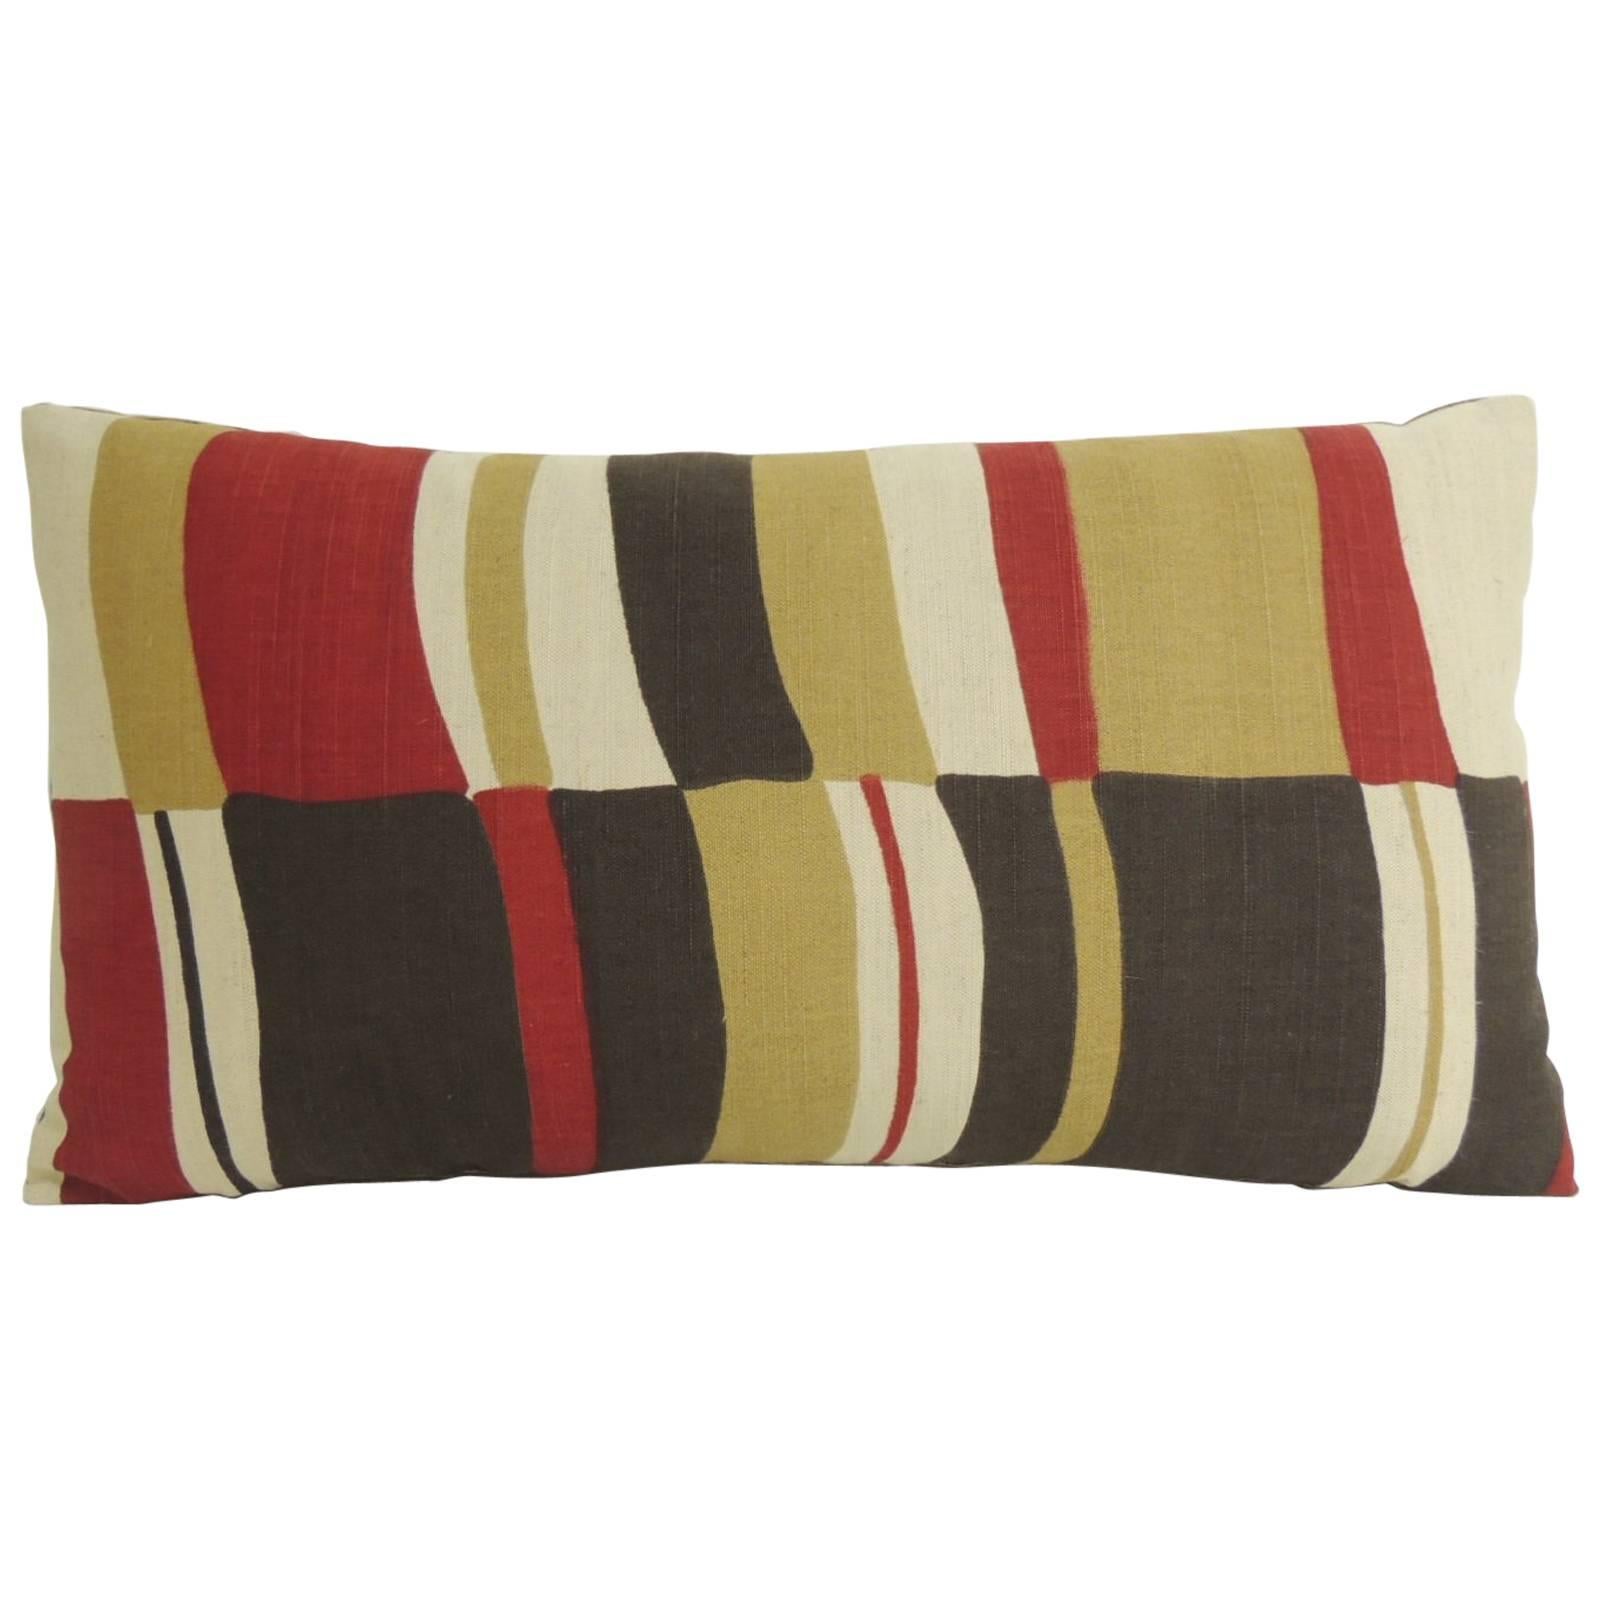 Mid-Century Modern Colorful Bolster Vintage Decorative Pillow